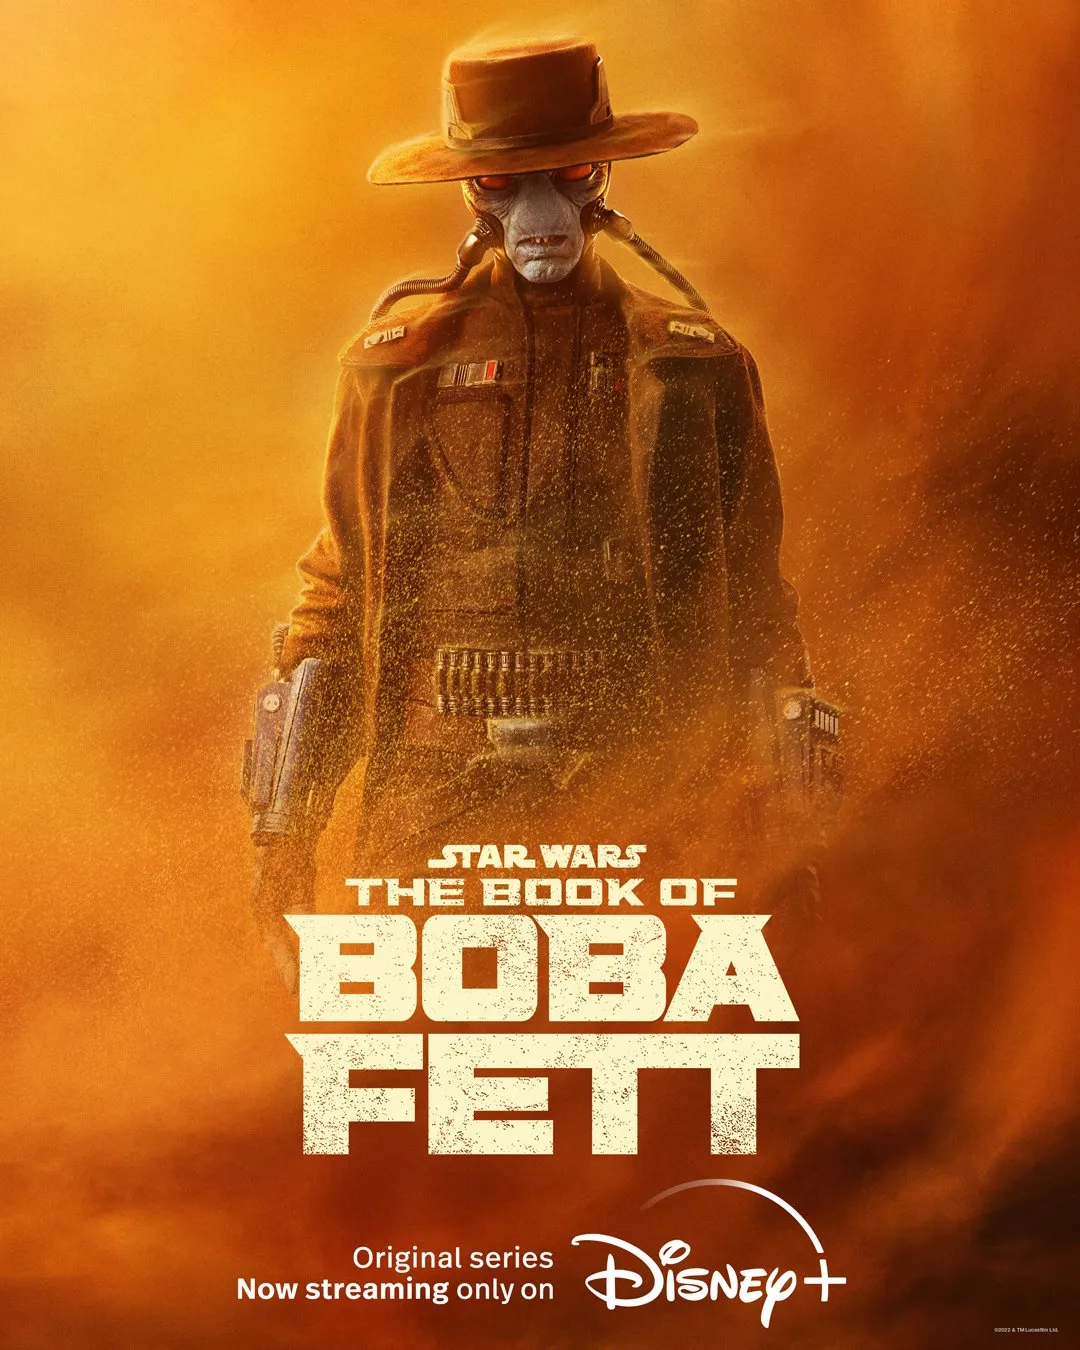 The Book of Boba Fett Chapter 6 Posters